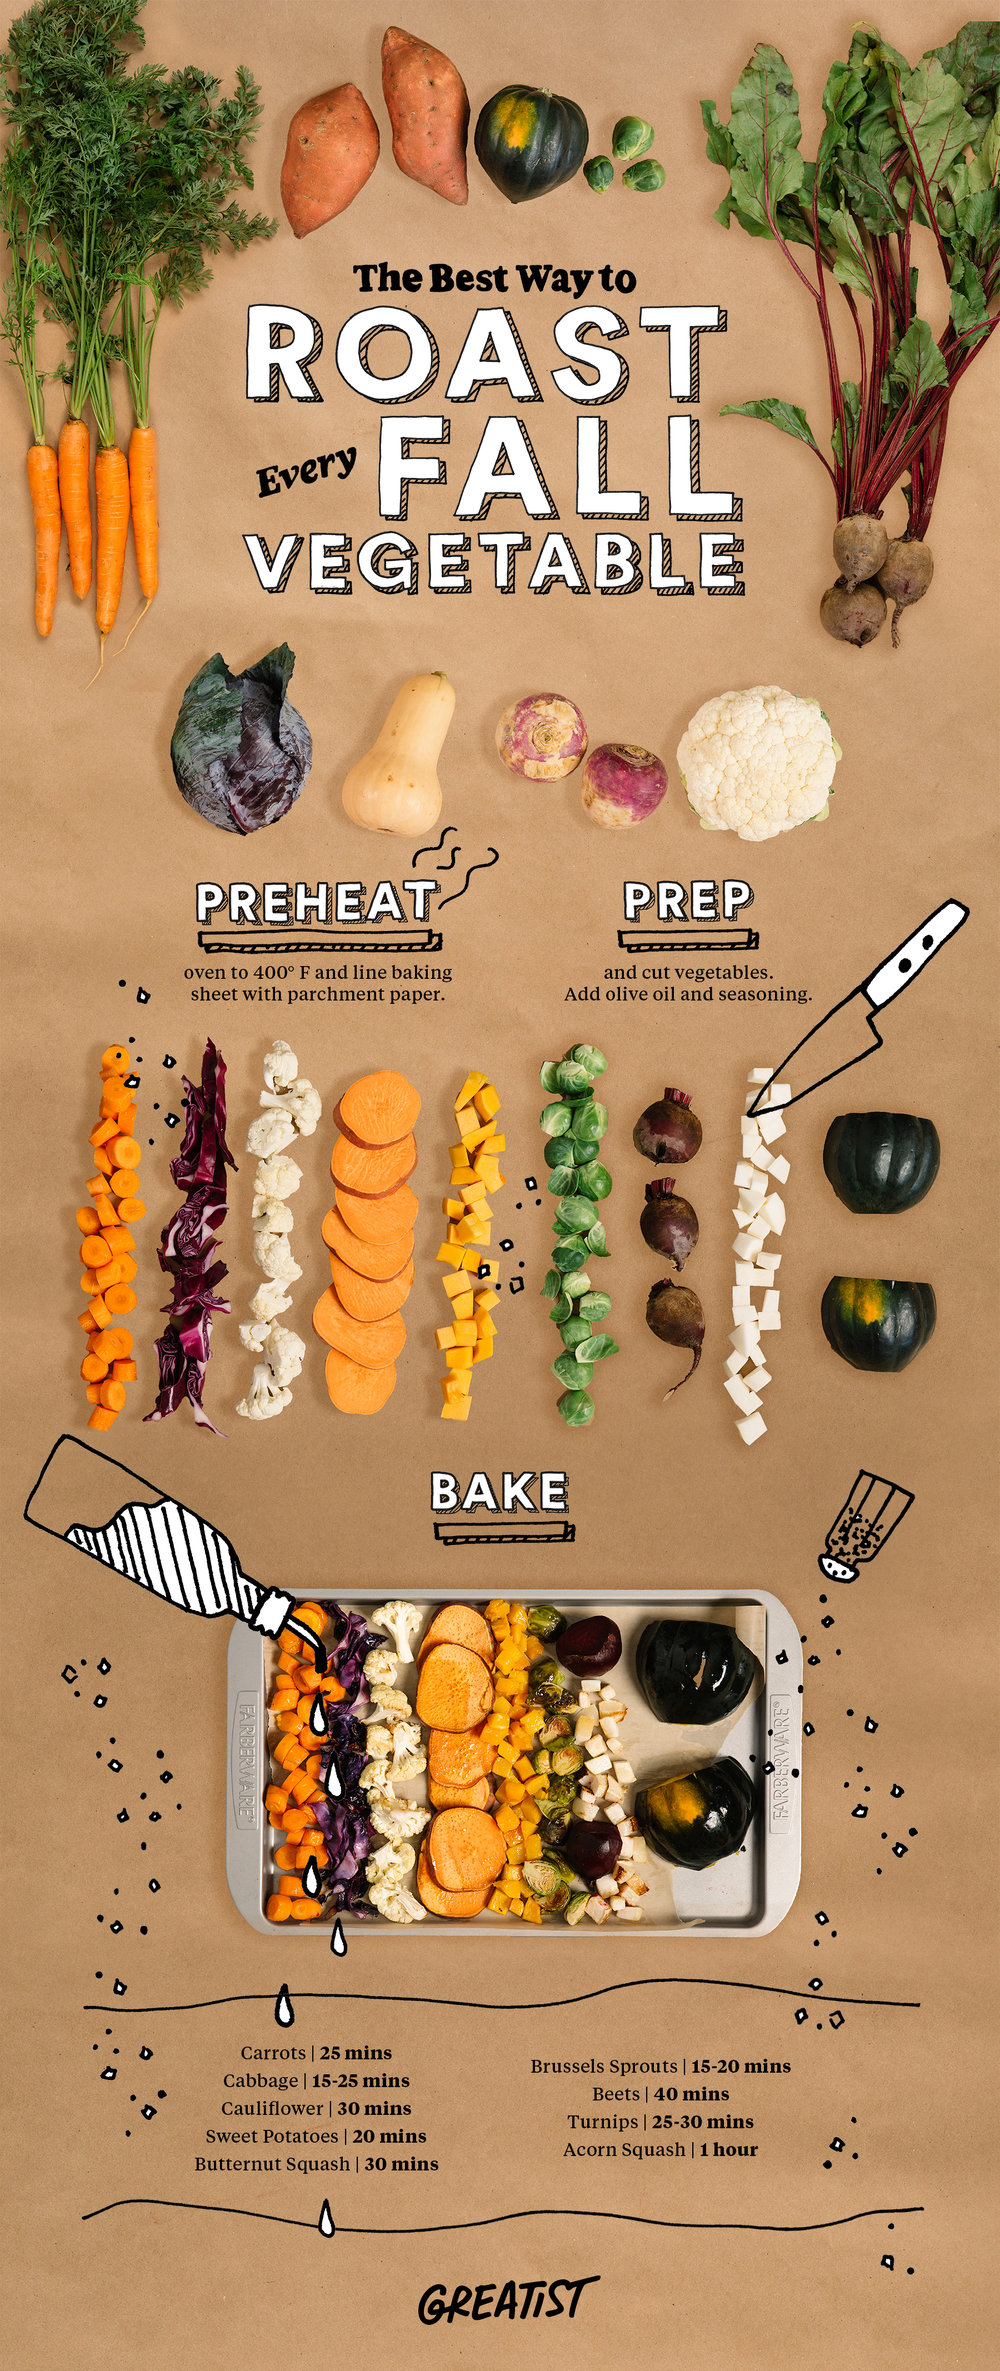 Roasting Fall Vegetables The Professional Way Infographic